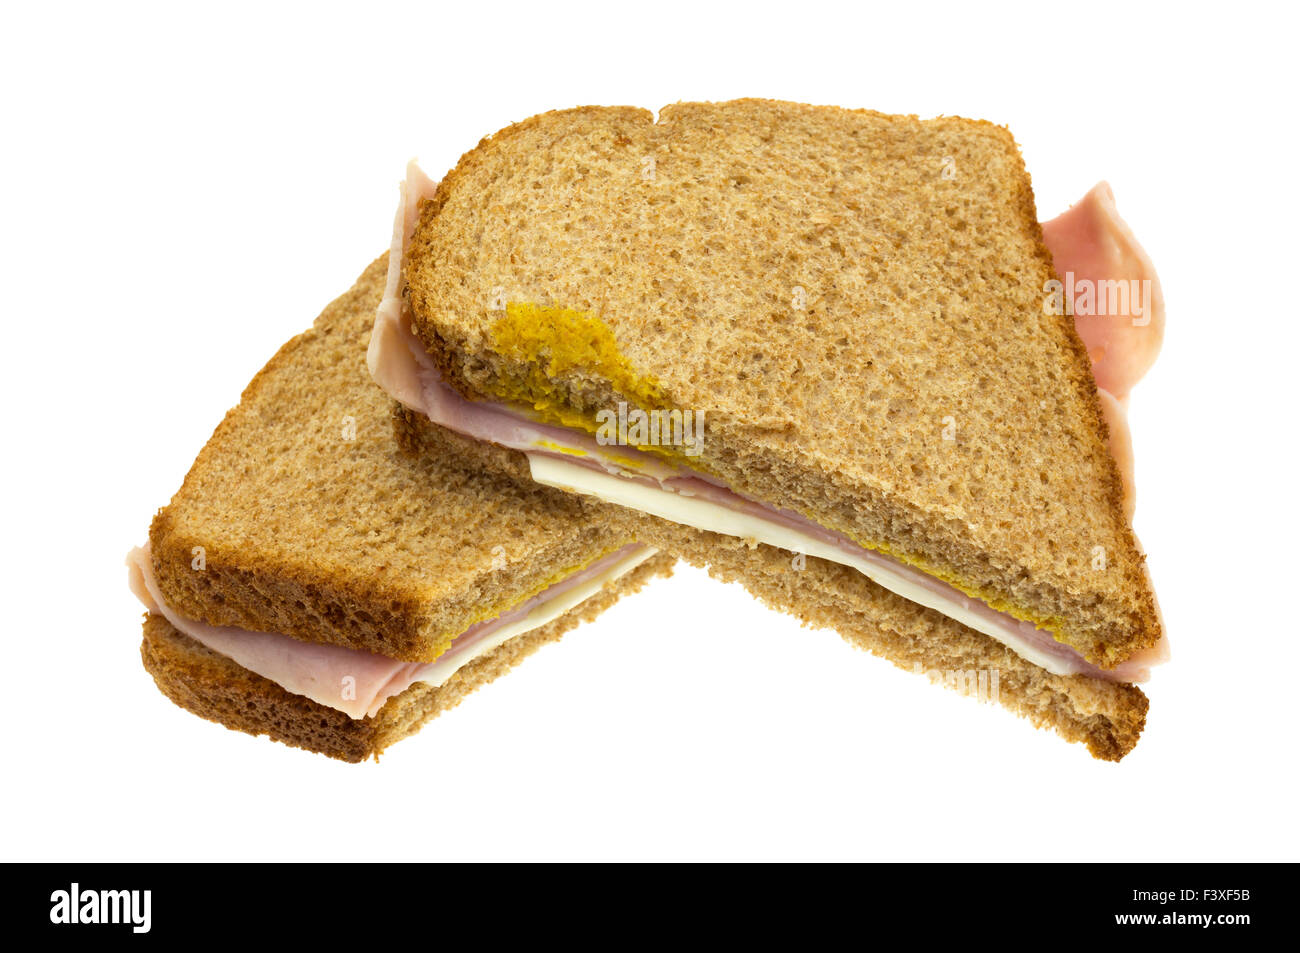 A ham and cheese sandwich that has been cut in half isolated on a white background. Stock Photo